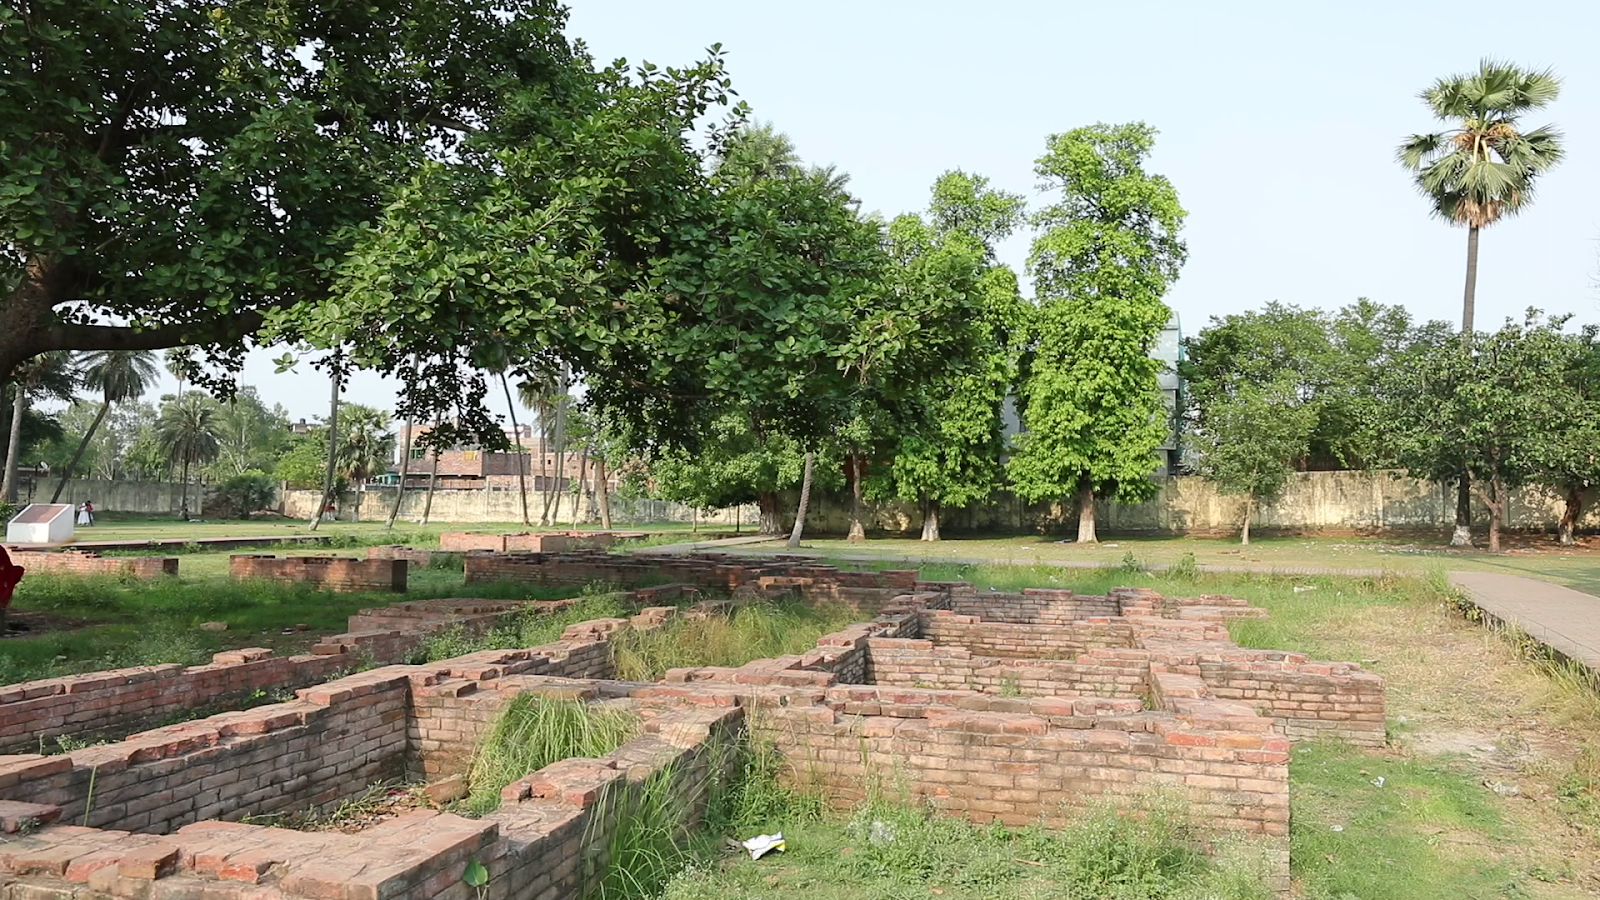 Remains of old structures at Patna